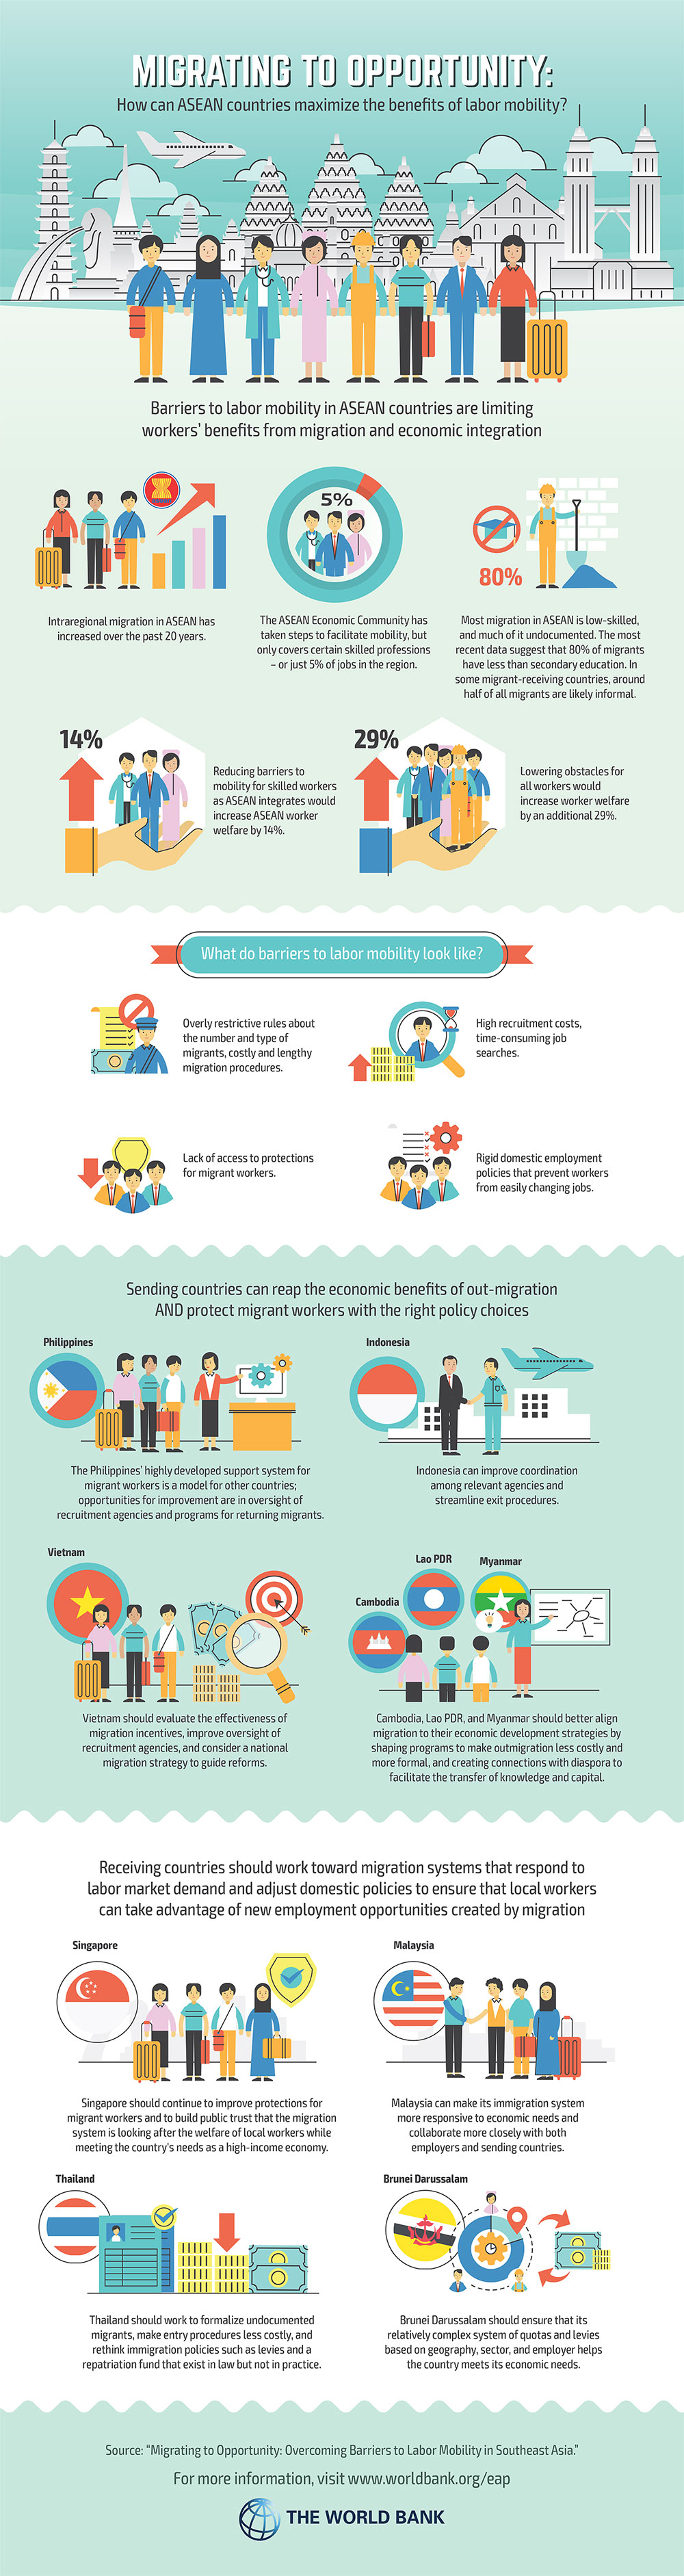 ASEAN-Labor-Mobility-Report-Infographic